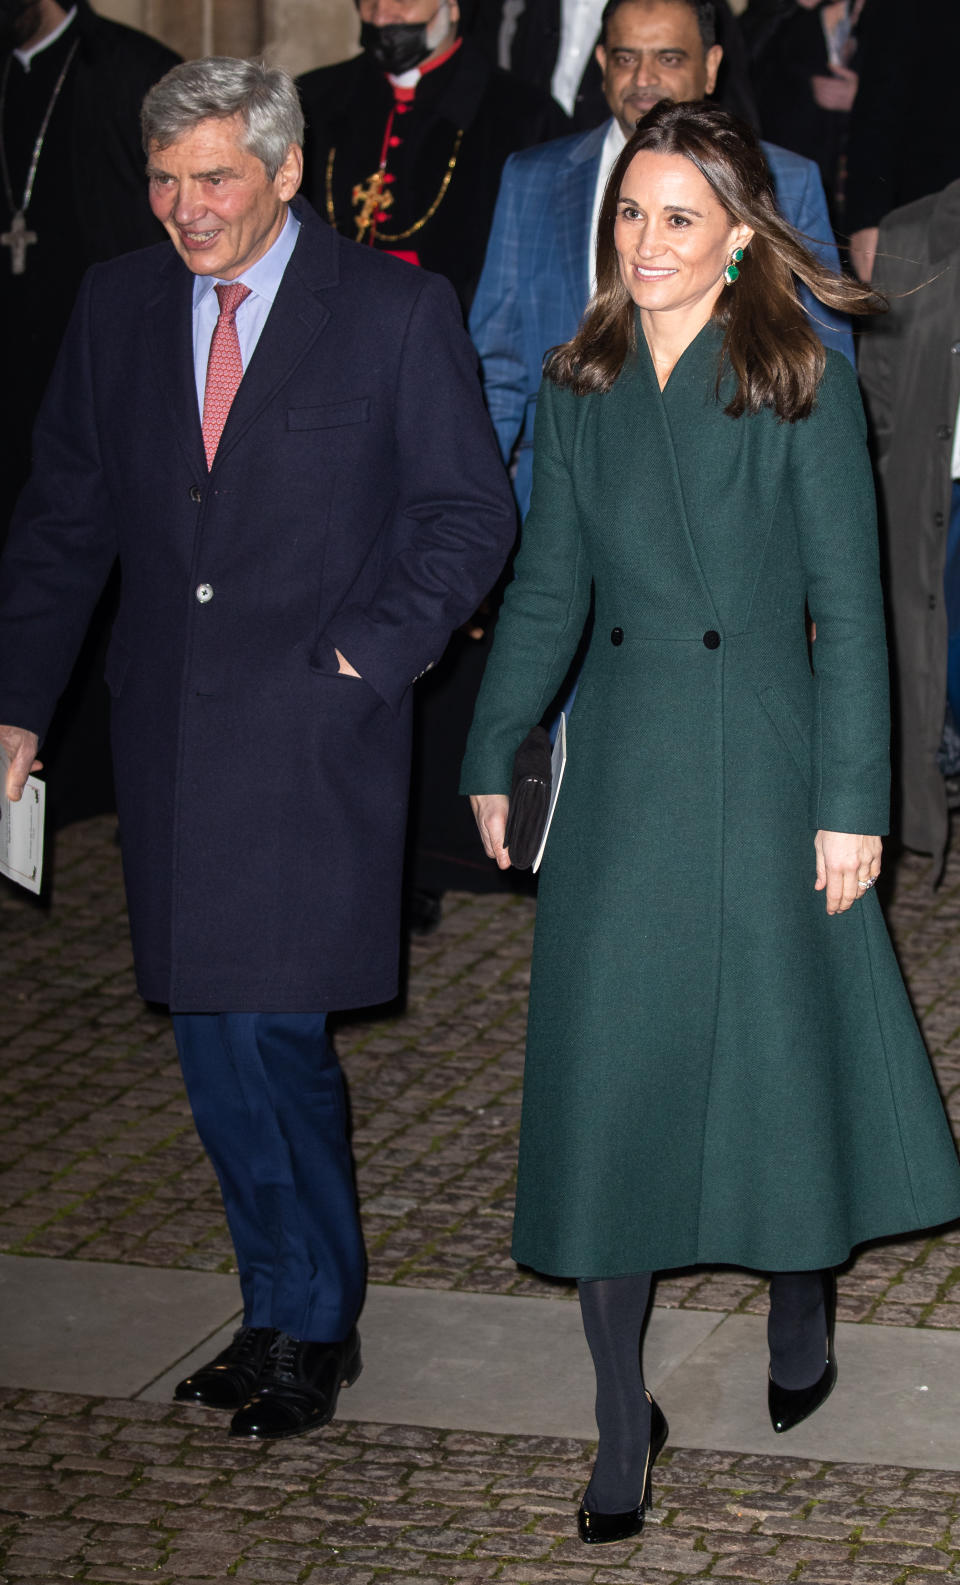 Pippa Middleton wearing a long green coat and a pair of patent leather pumps at the ‘Together At Christmas’ carol service at Westminster Abbey in London. - Credit: John Rainford / SplashNews.com